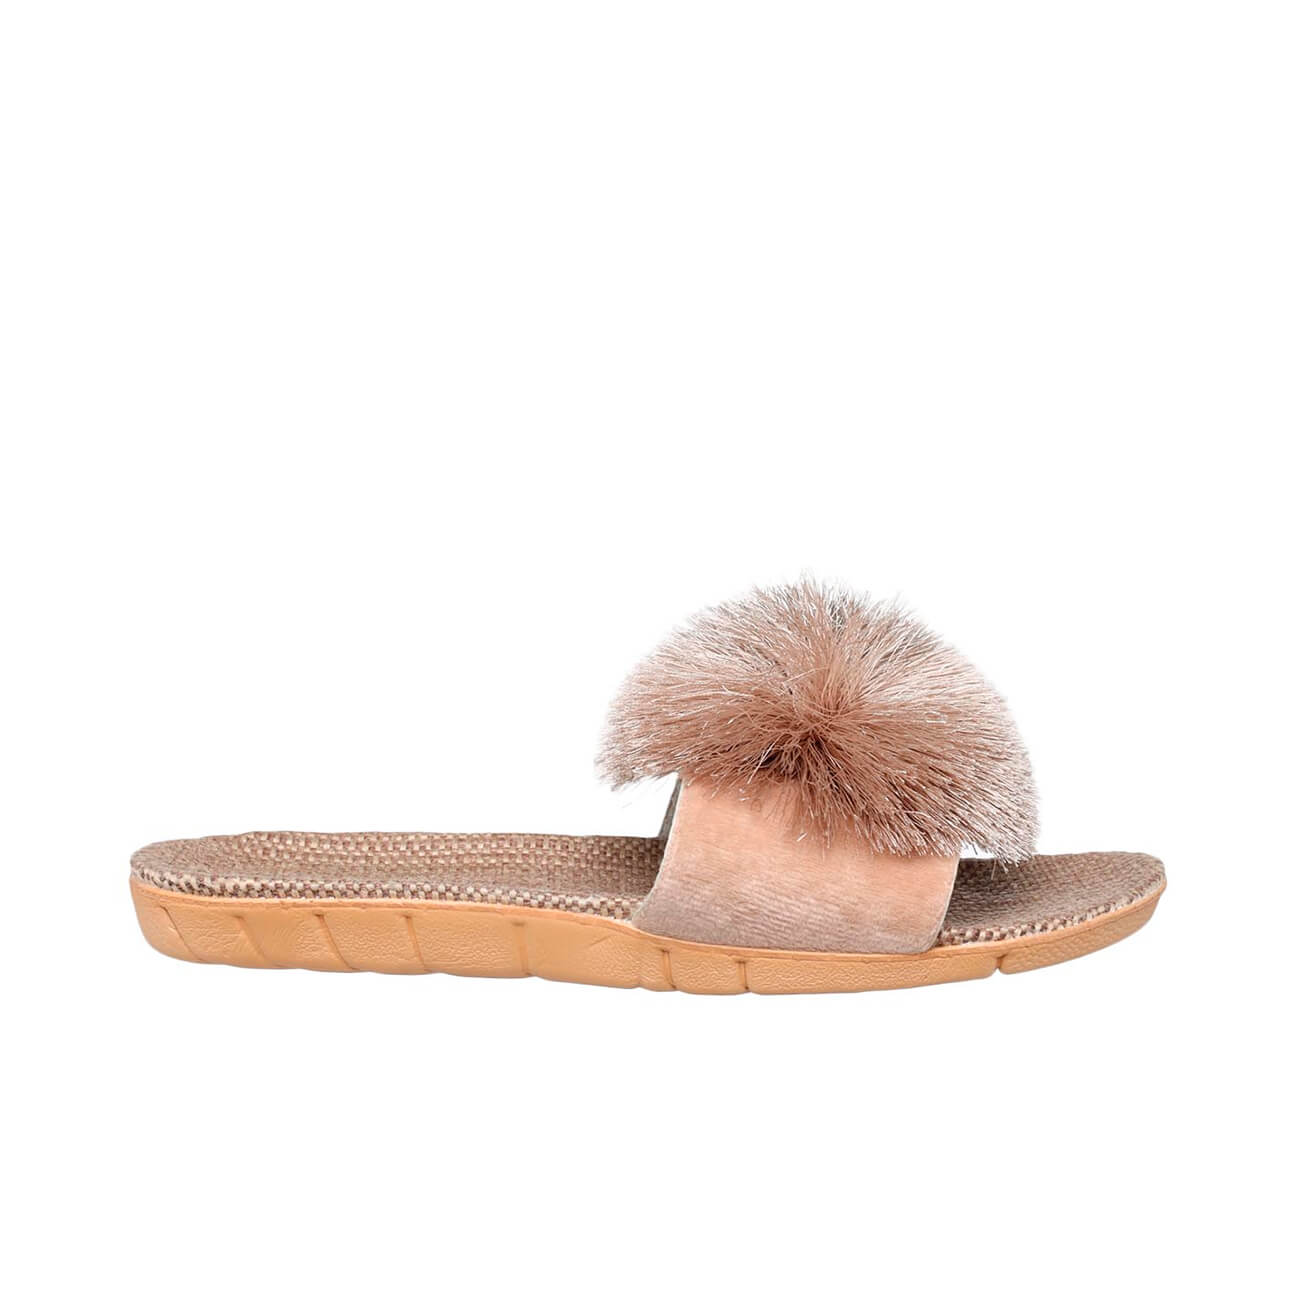 Slippers for women, home, p. 37-38, with pompom, polyester / linen, gray-brown, Pompon изображение № 1